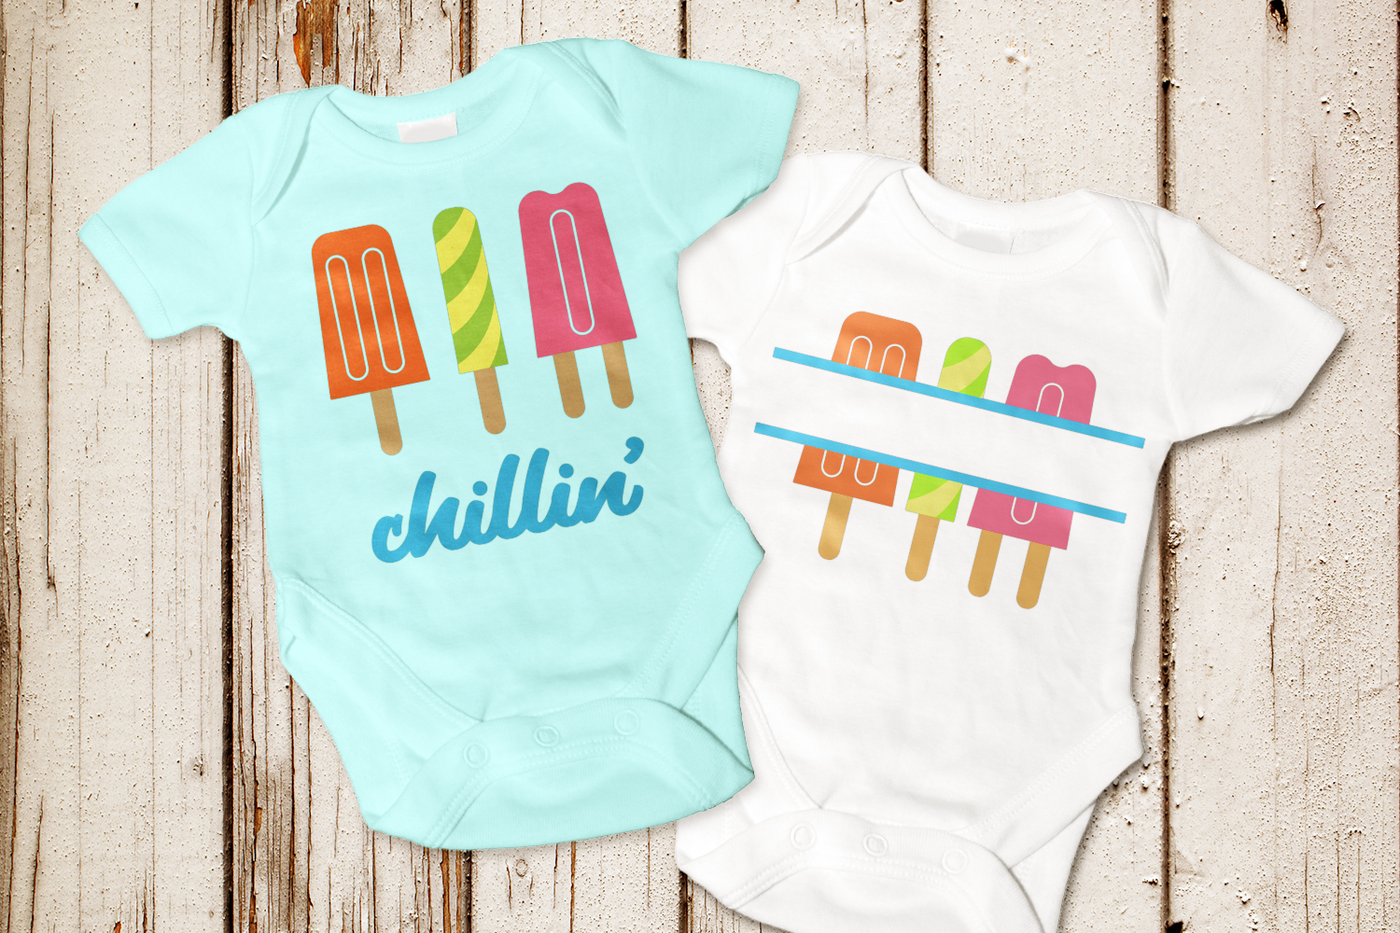 Popsicle trio that says "chillin'" and popsicle split designs